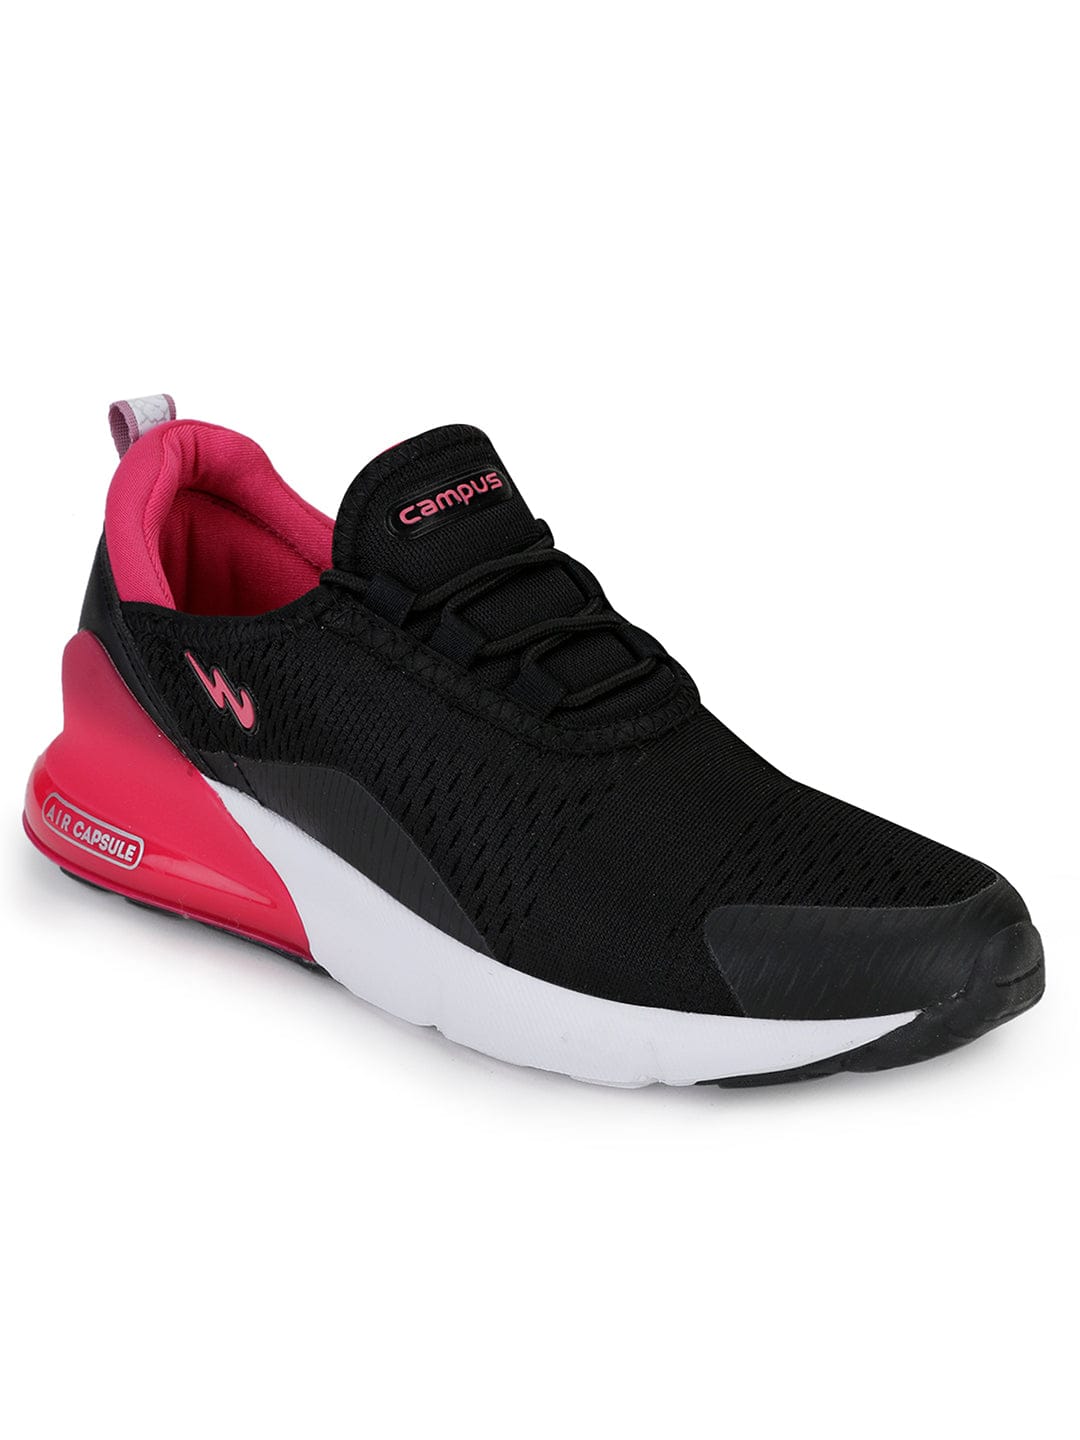 Buy DRAGON LADIES Black Women's Running Shoes online | Campus Shoes